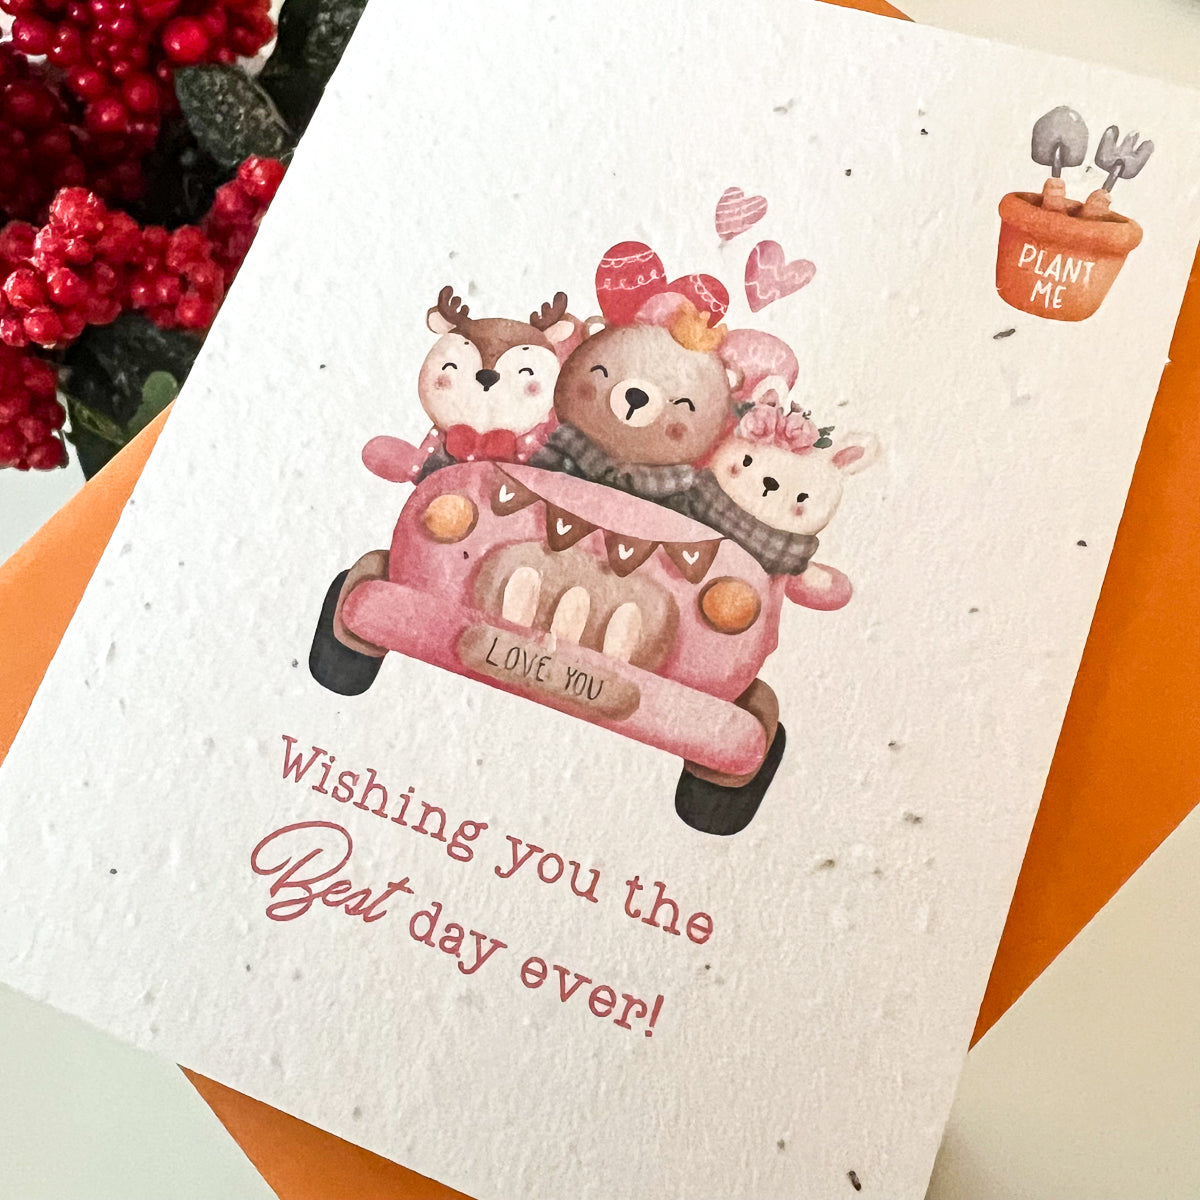 Plantable Seed Card - Wishing You The Best Day Ever